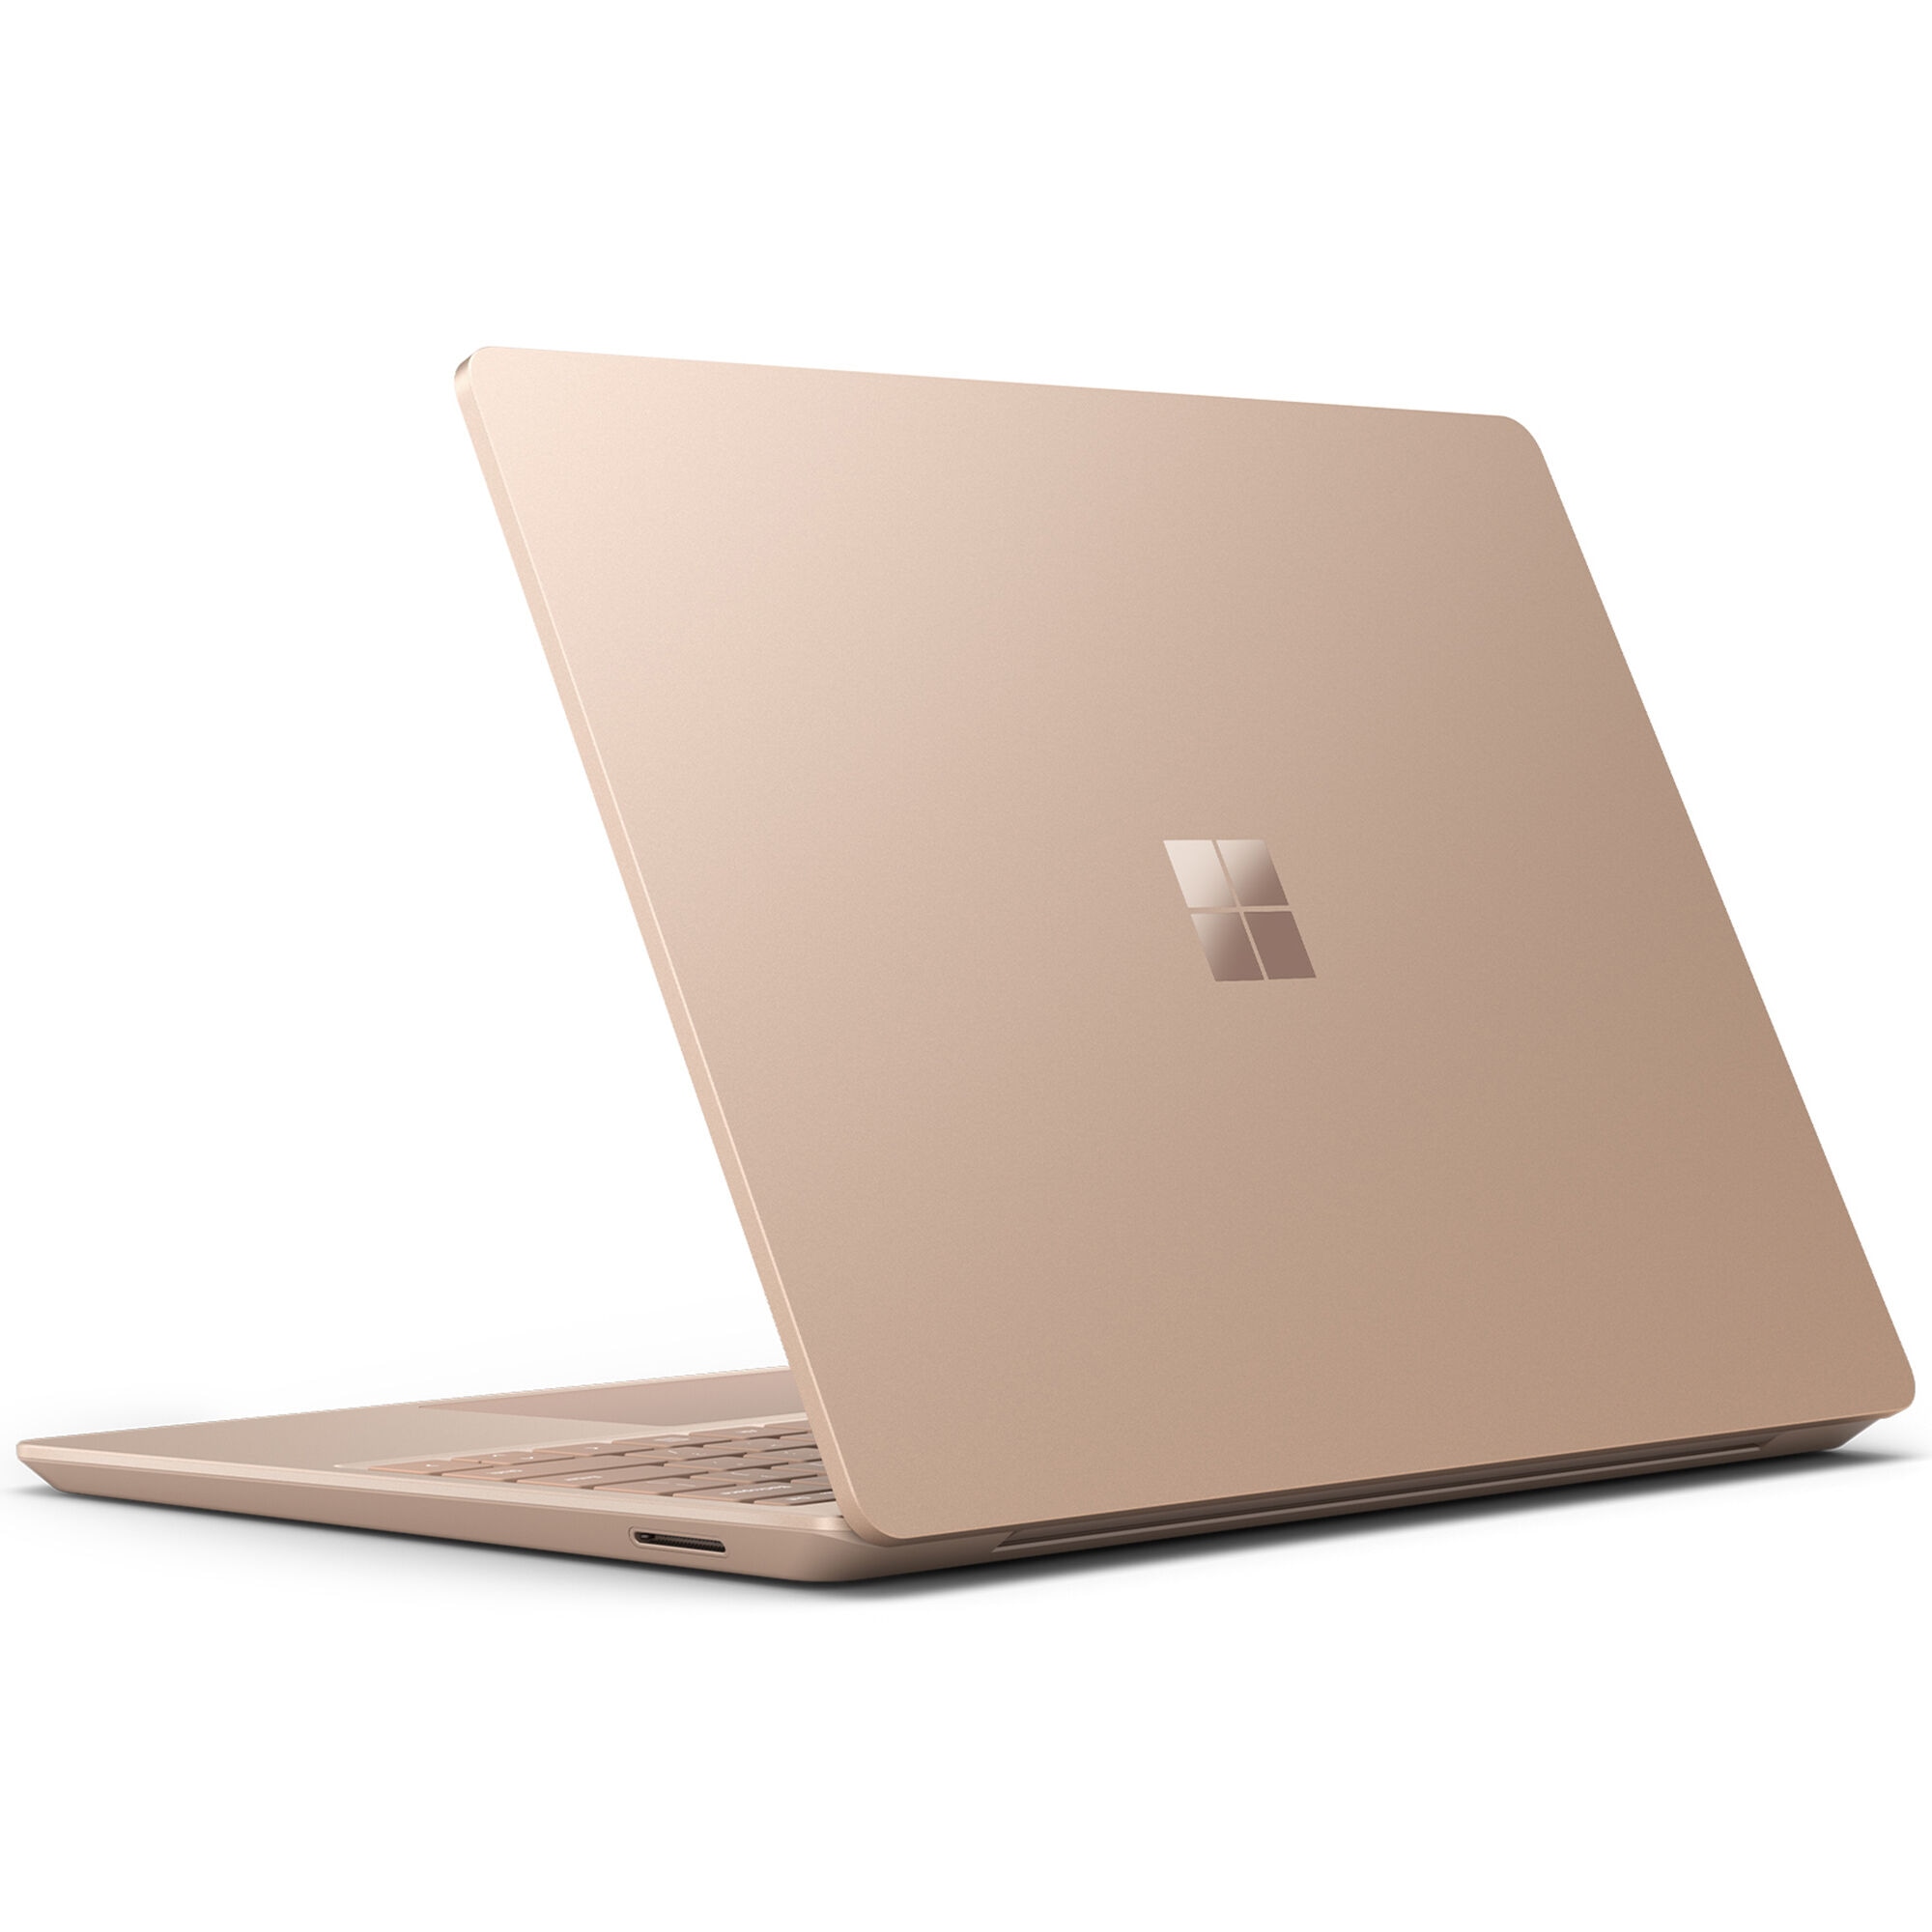 Microsoft Surface Laptop Go 3 12.4inch Touch-Screen, Intel Core i5 with 8GB  RAM, 256GB SSD - Sandstone